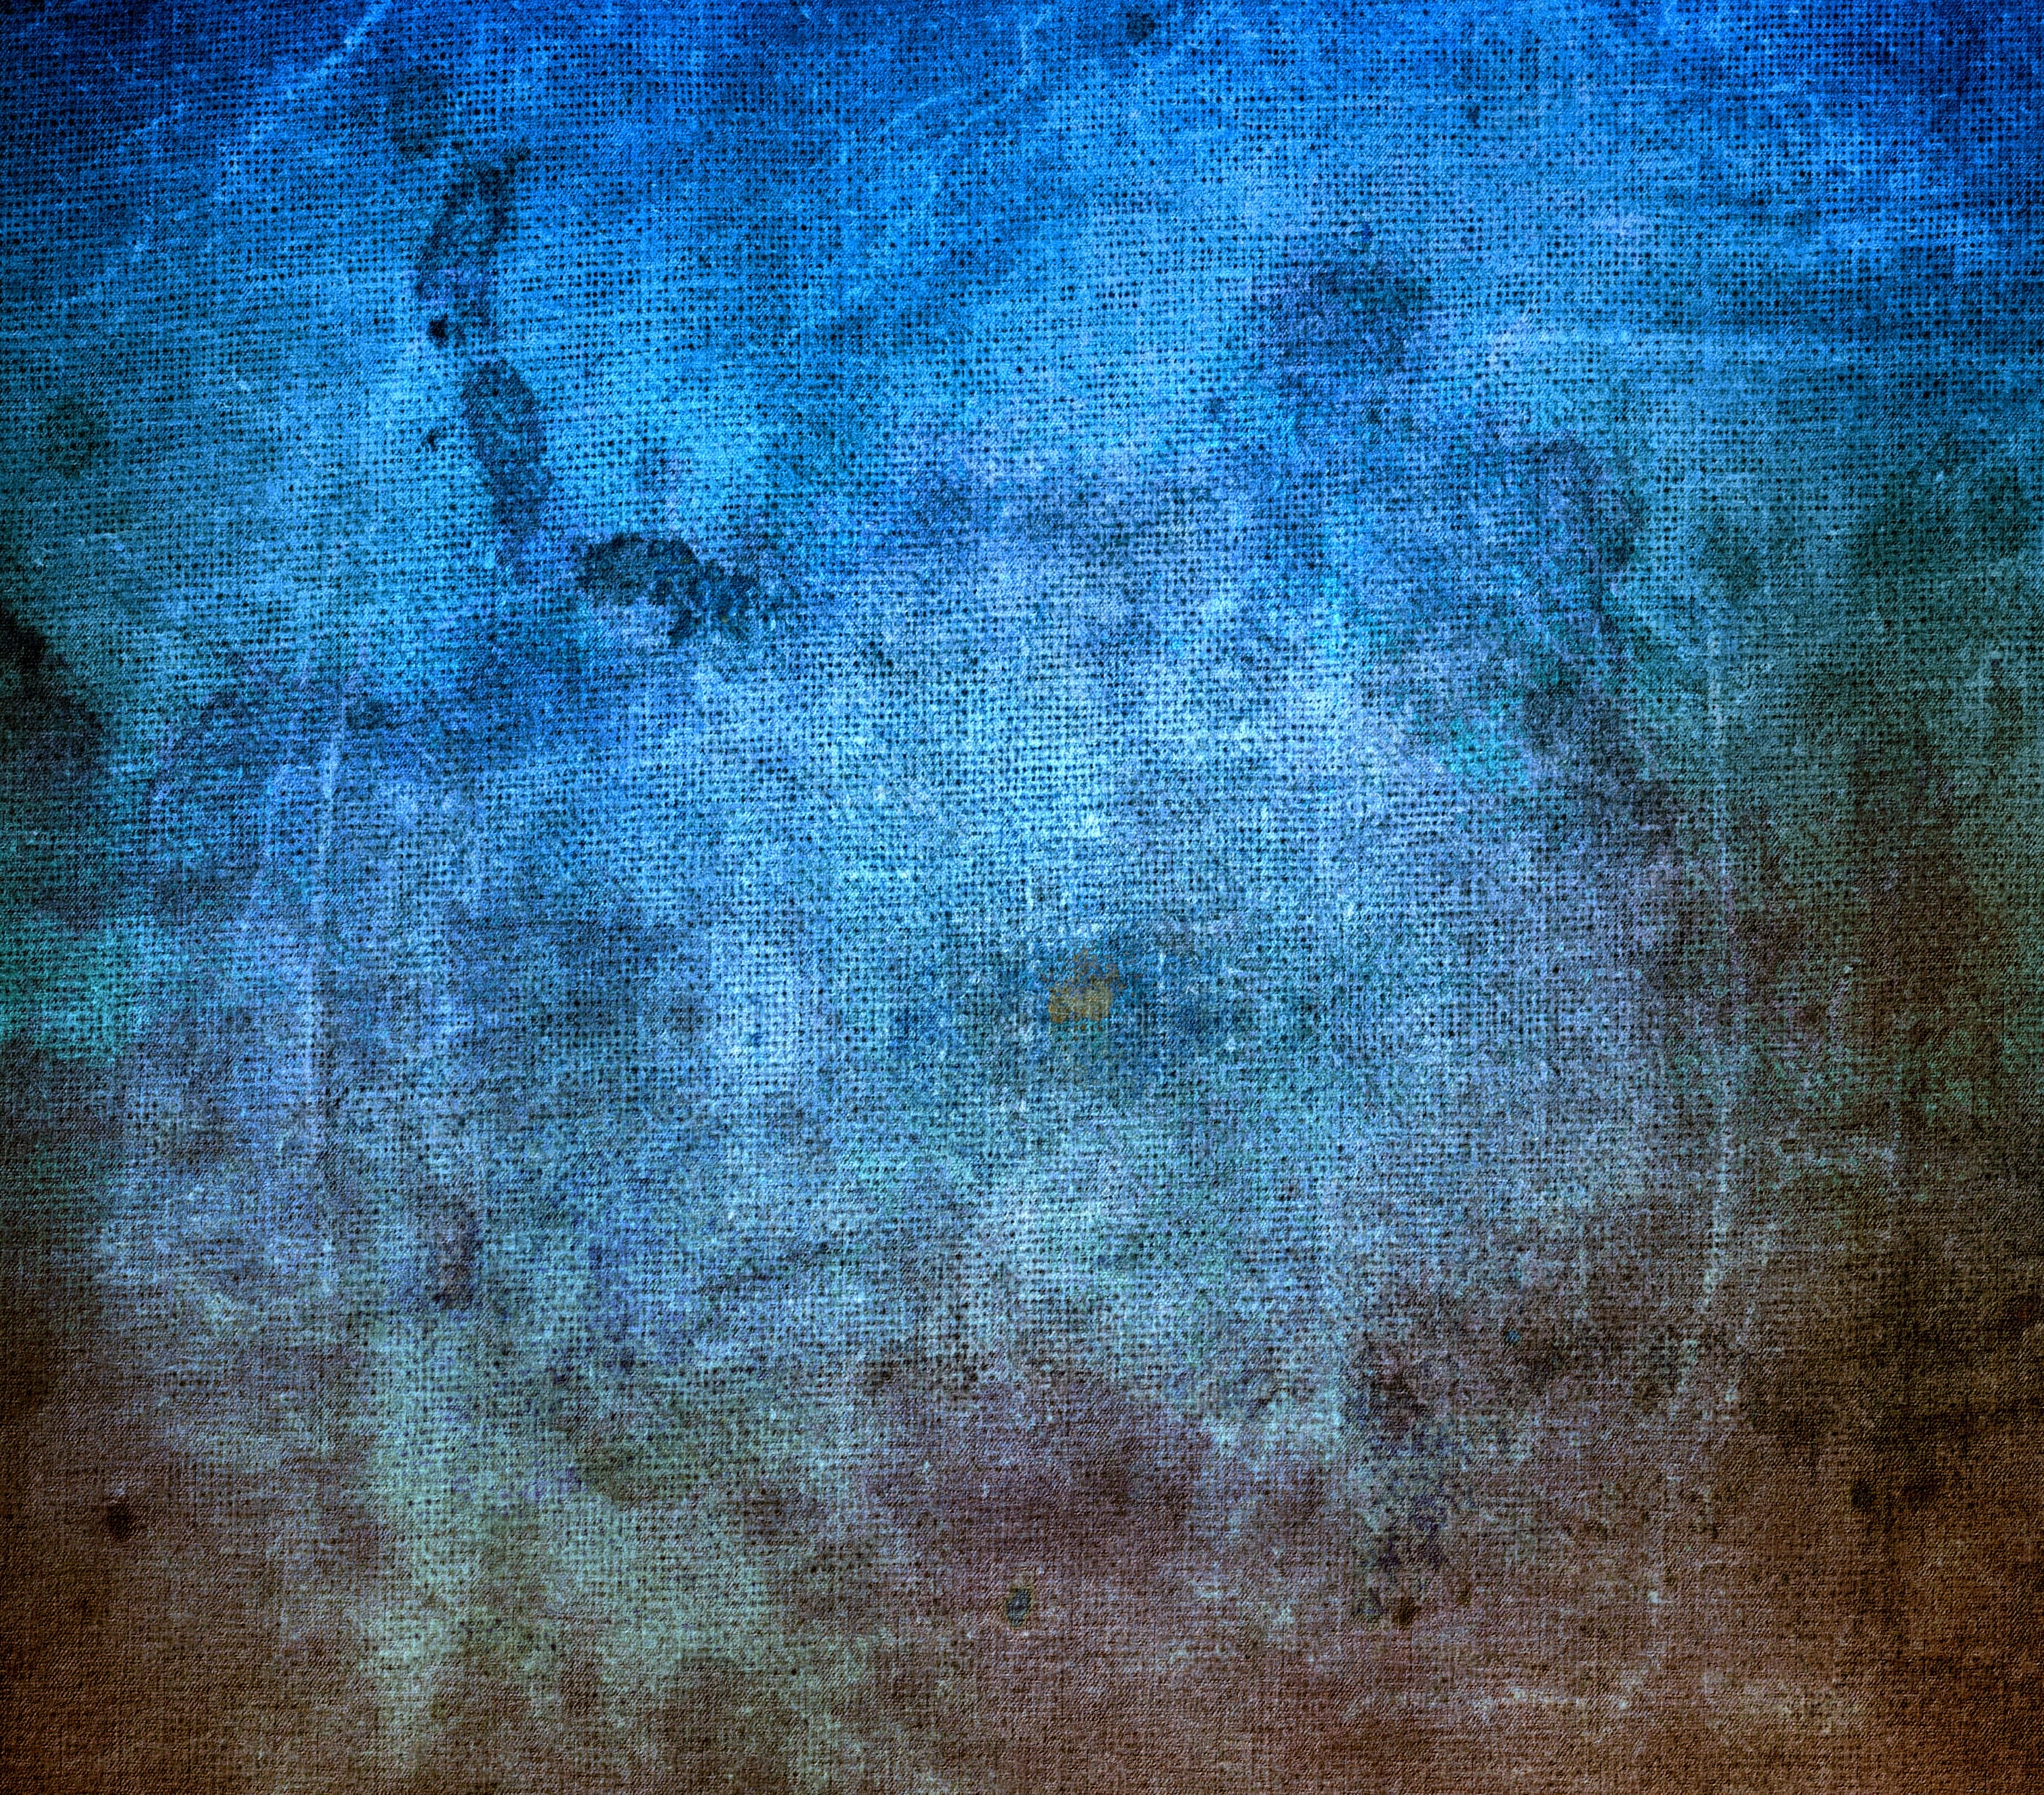 blue abstract grunge background image